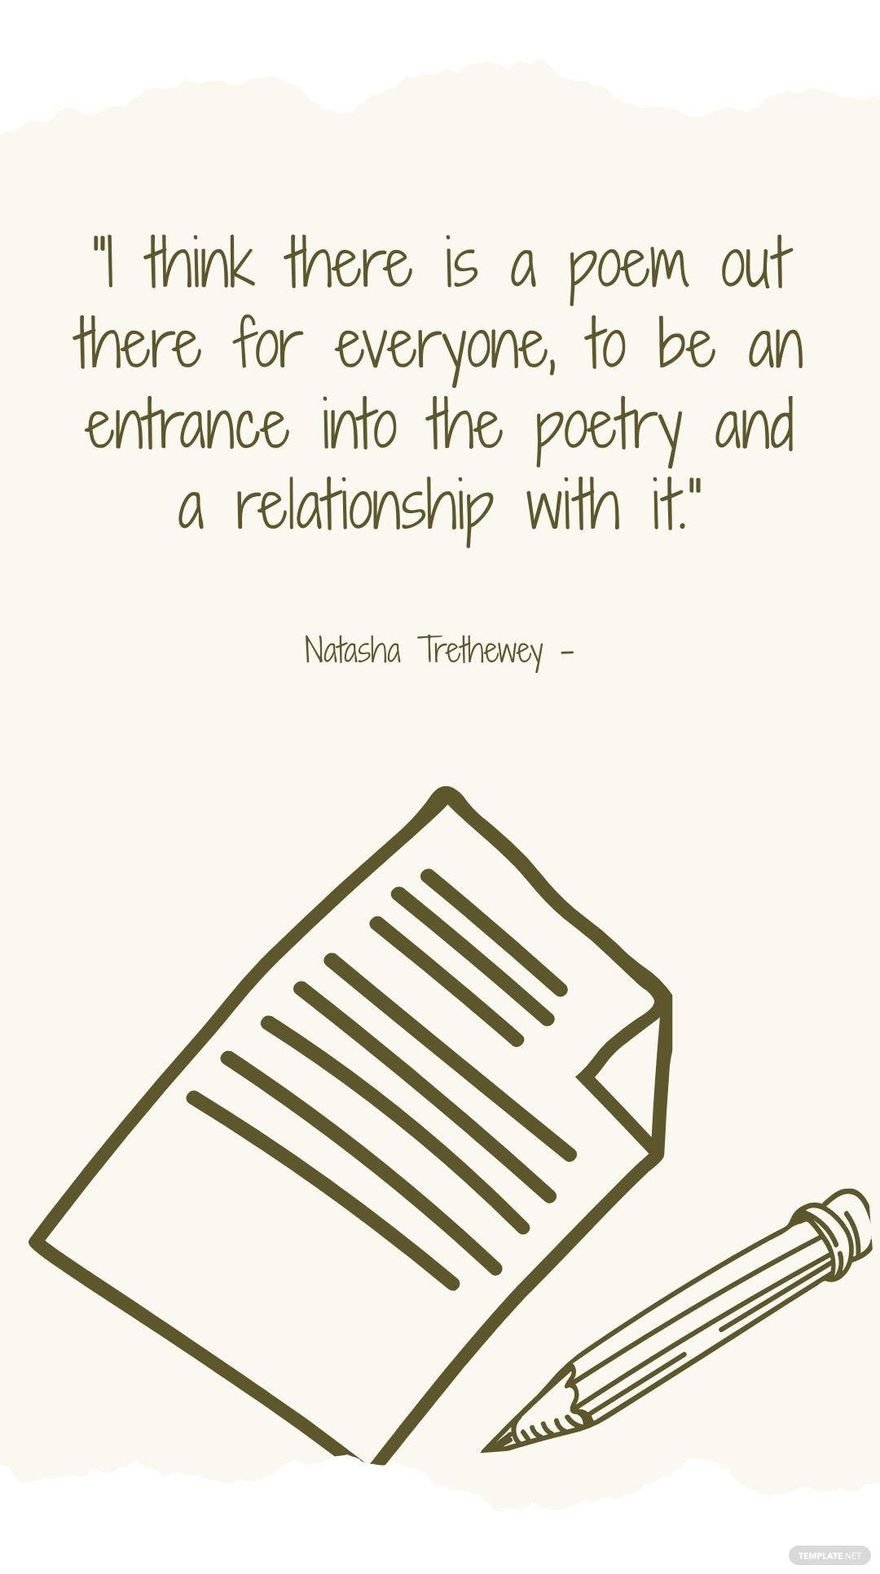 Natasha Trethewey - I think there is a poem out there for everyone, to be an entrance into the poetry and a relationship with it.